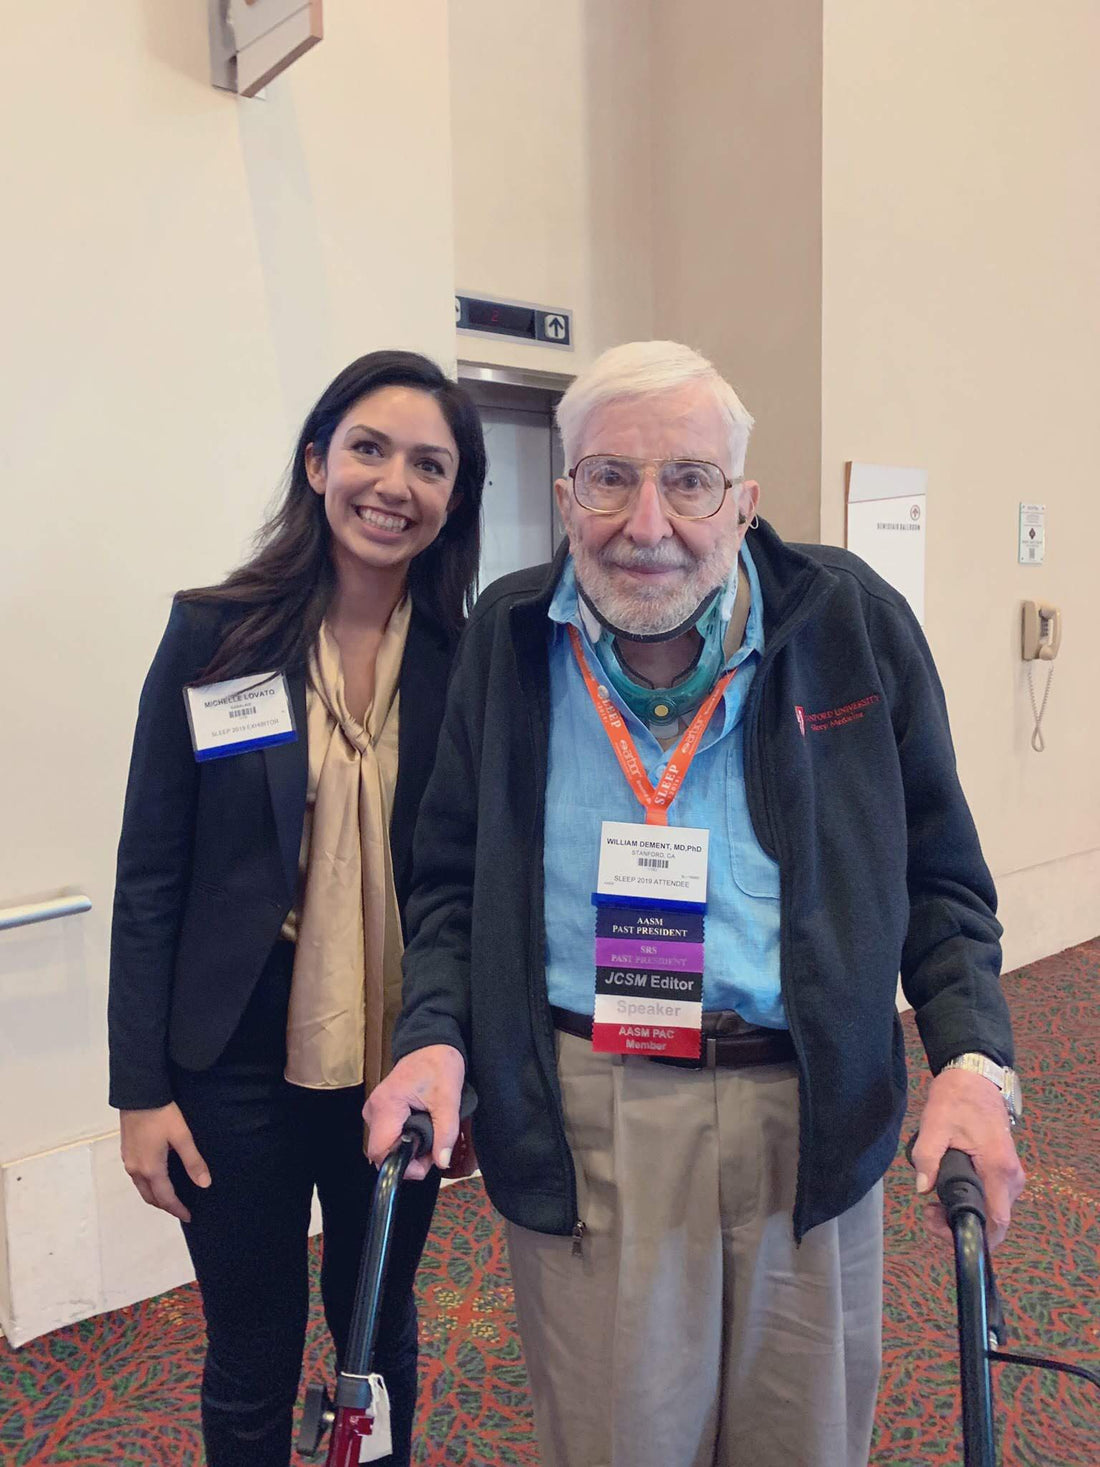 Photo of Dr. William Dement and Michelle Lovato at the American Academy of Sleep Medicine Meeting 2019